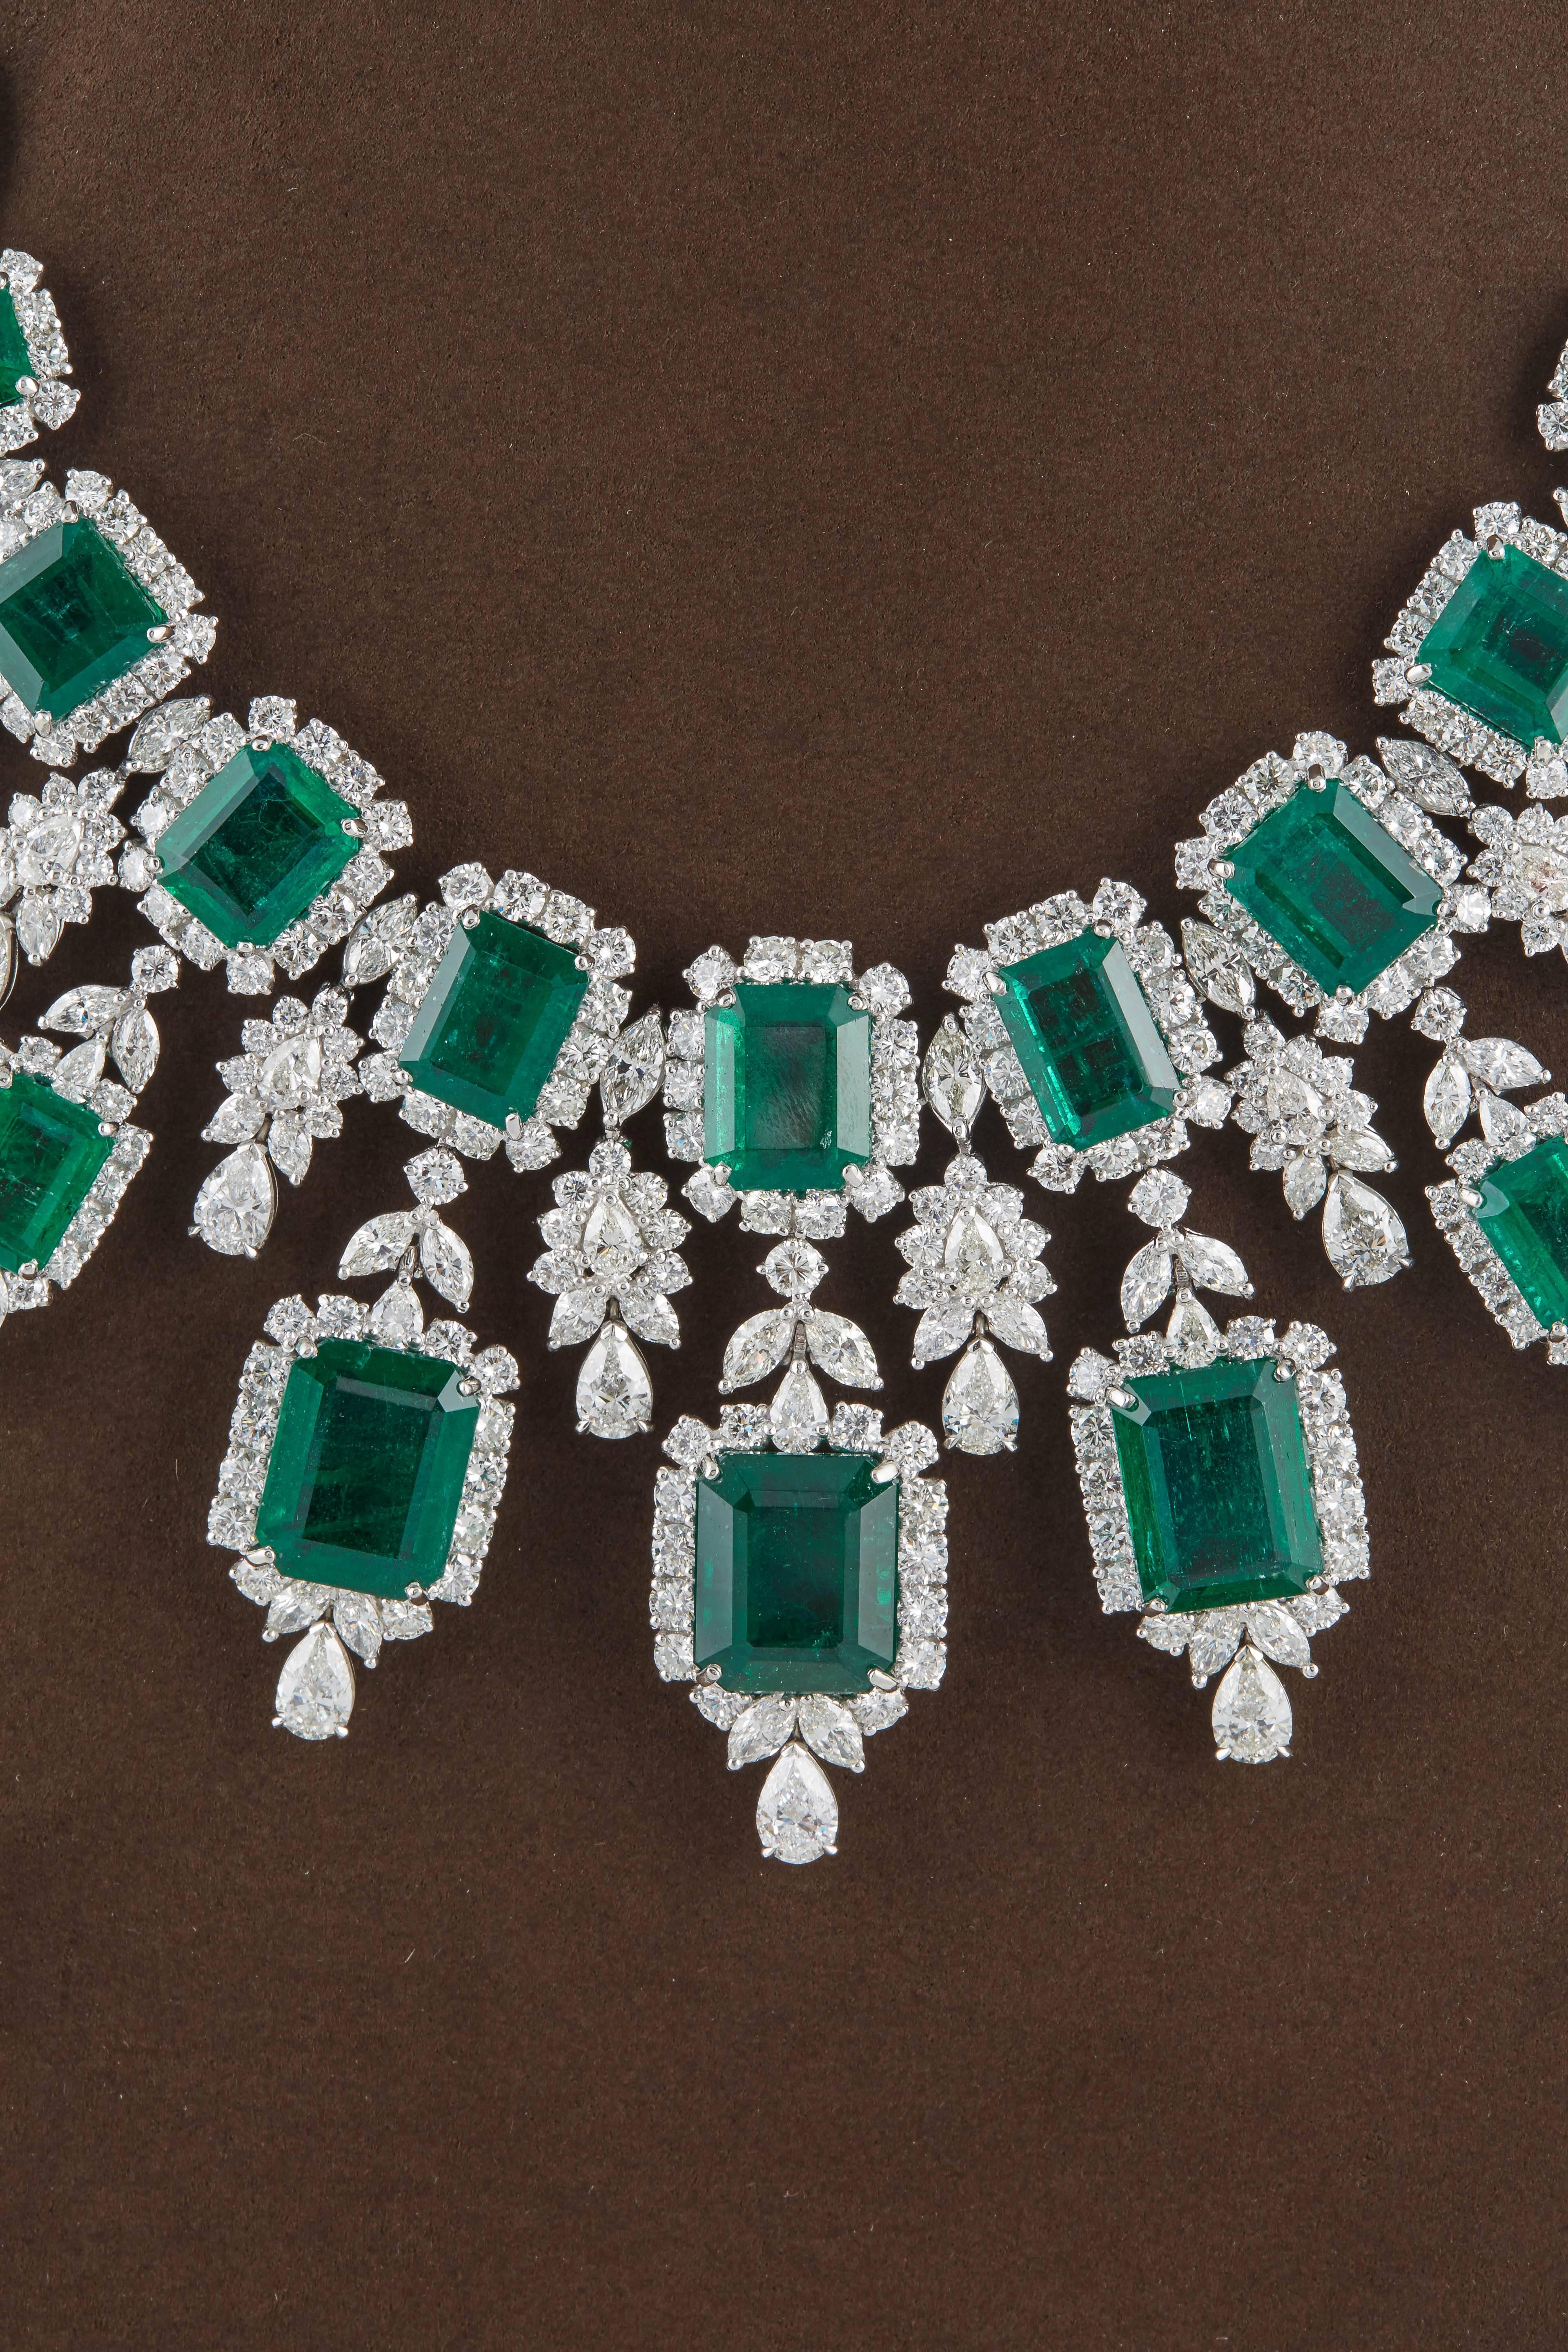 

An AMAZING piece!

137.60 carats of Fine Green Emeralds 

87.80 carats of white round brilliant, pear and marquise diamonds. 

Platinum

The middle drop measures approximately 2.3 inches from top to bottom. 

An incredible necklace comprised of